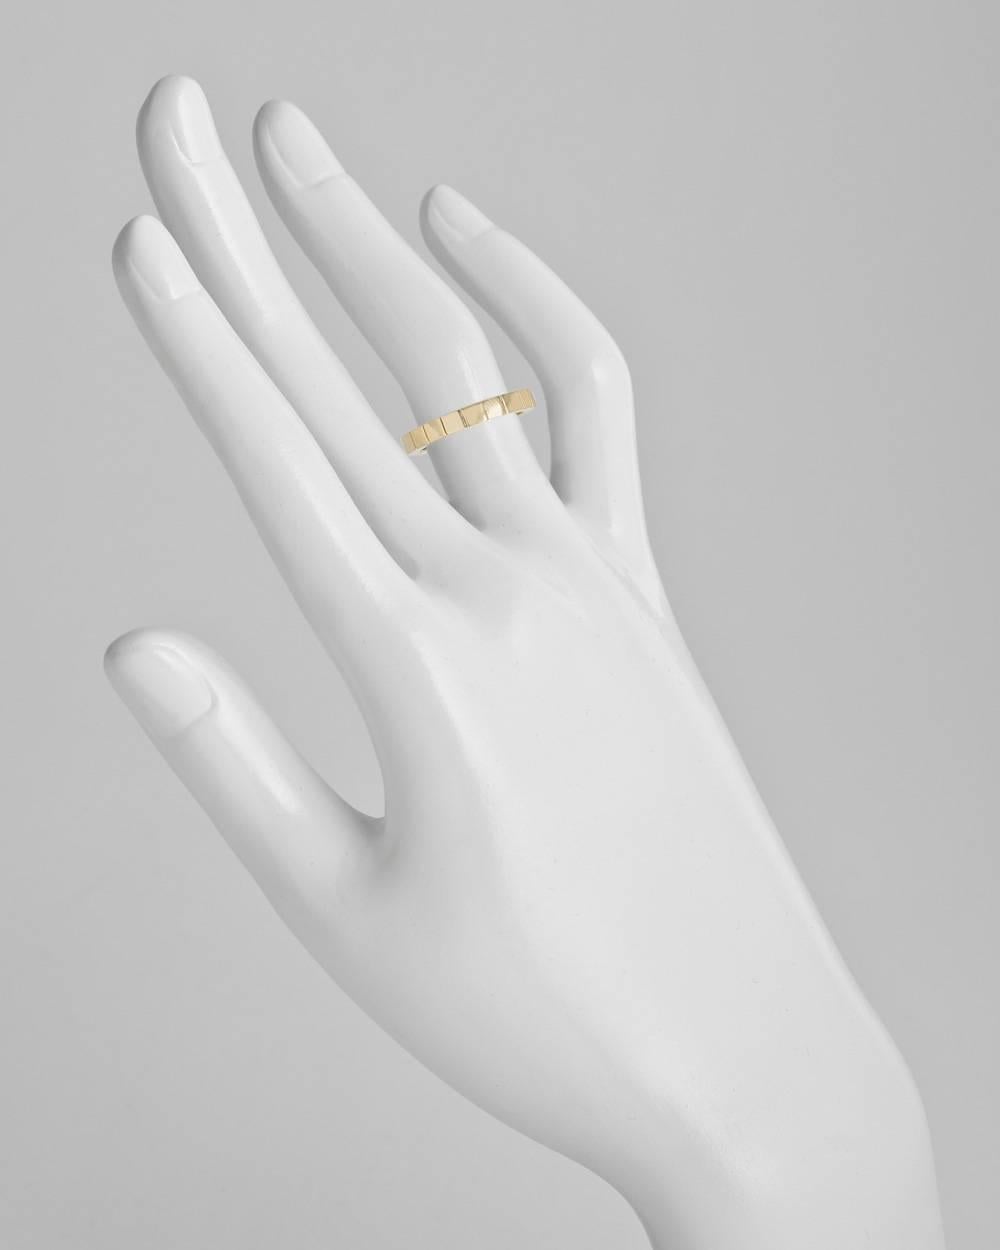 "Lanières" slender band ring, designed as a continuous sequence of square motifs, in high-polished 18k yellow gold, numbered AJ7627 and signed Cartier. 3mm band width. Size 5.25 (50 - European). This ring cannot be resized.
